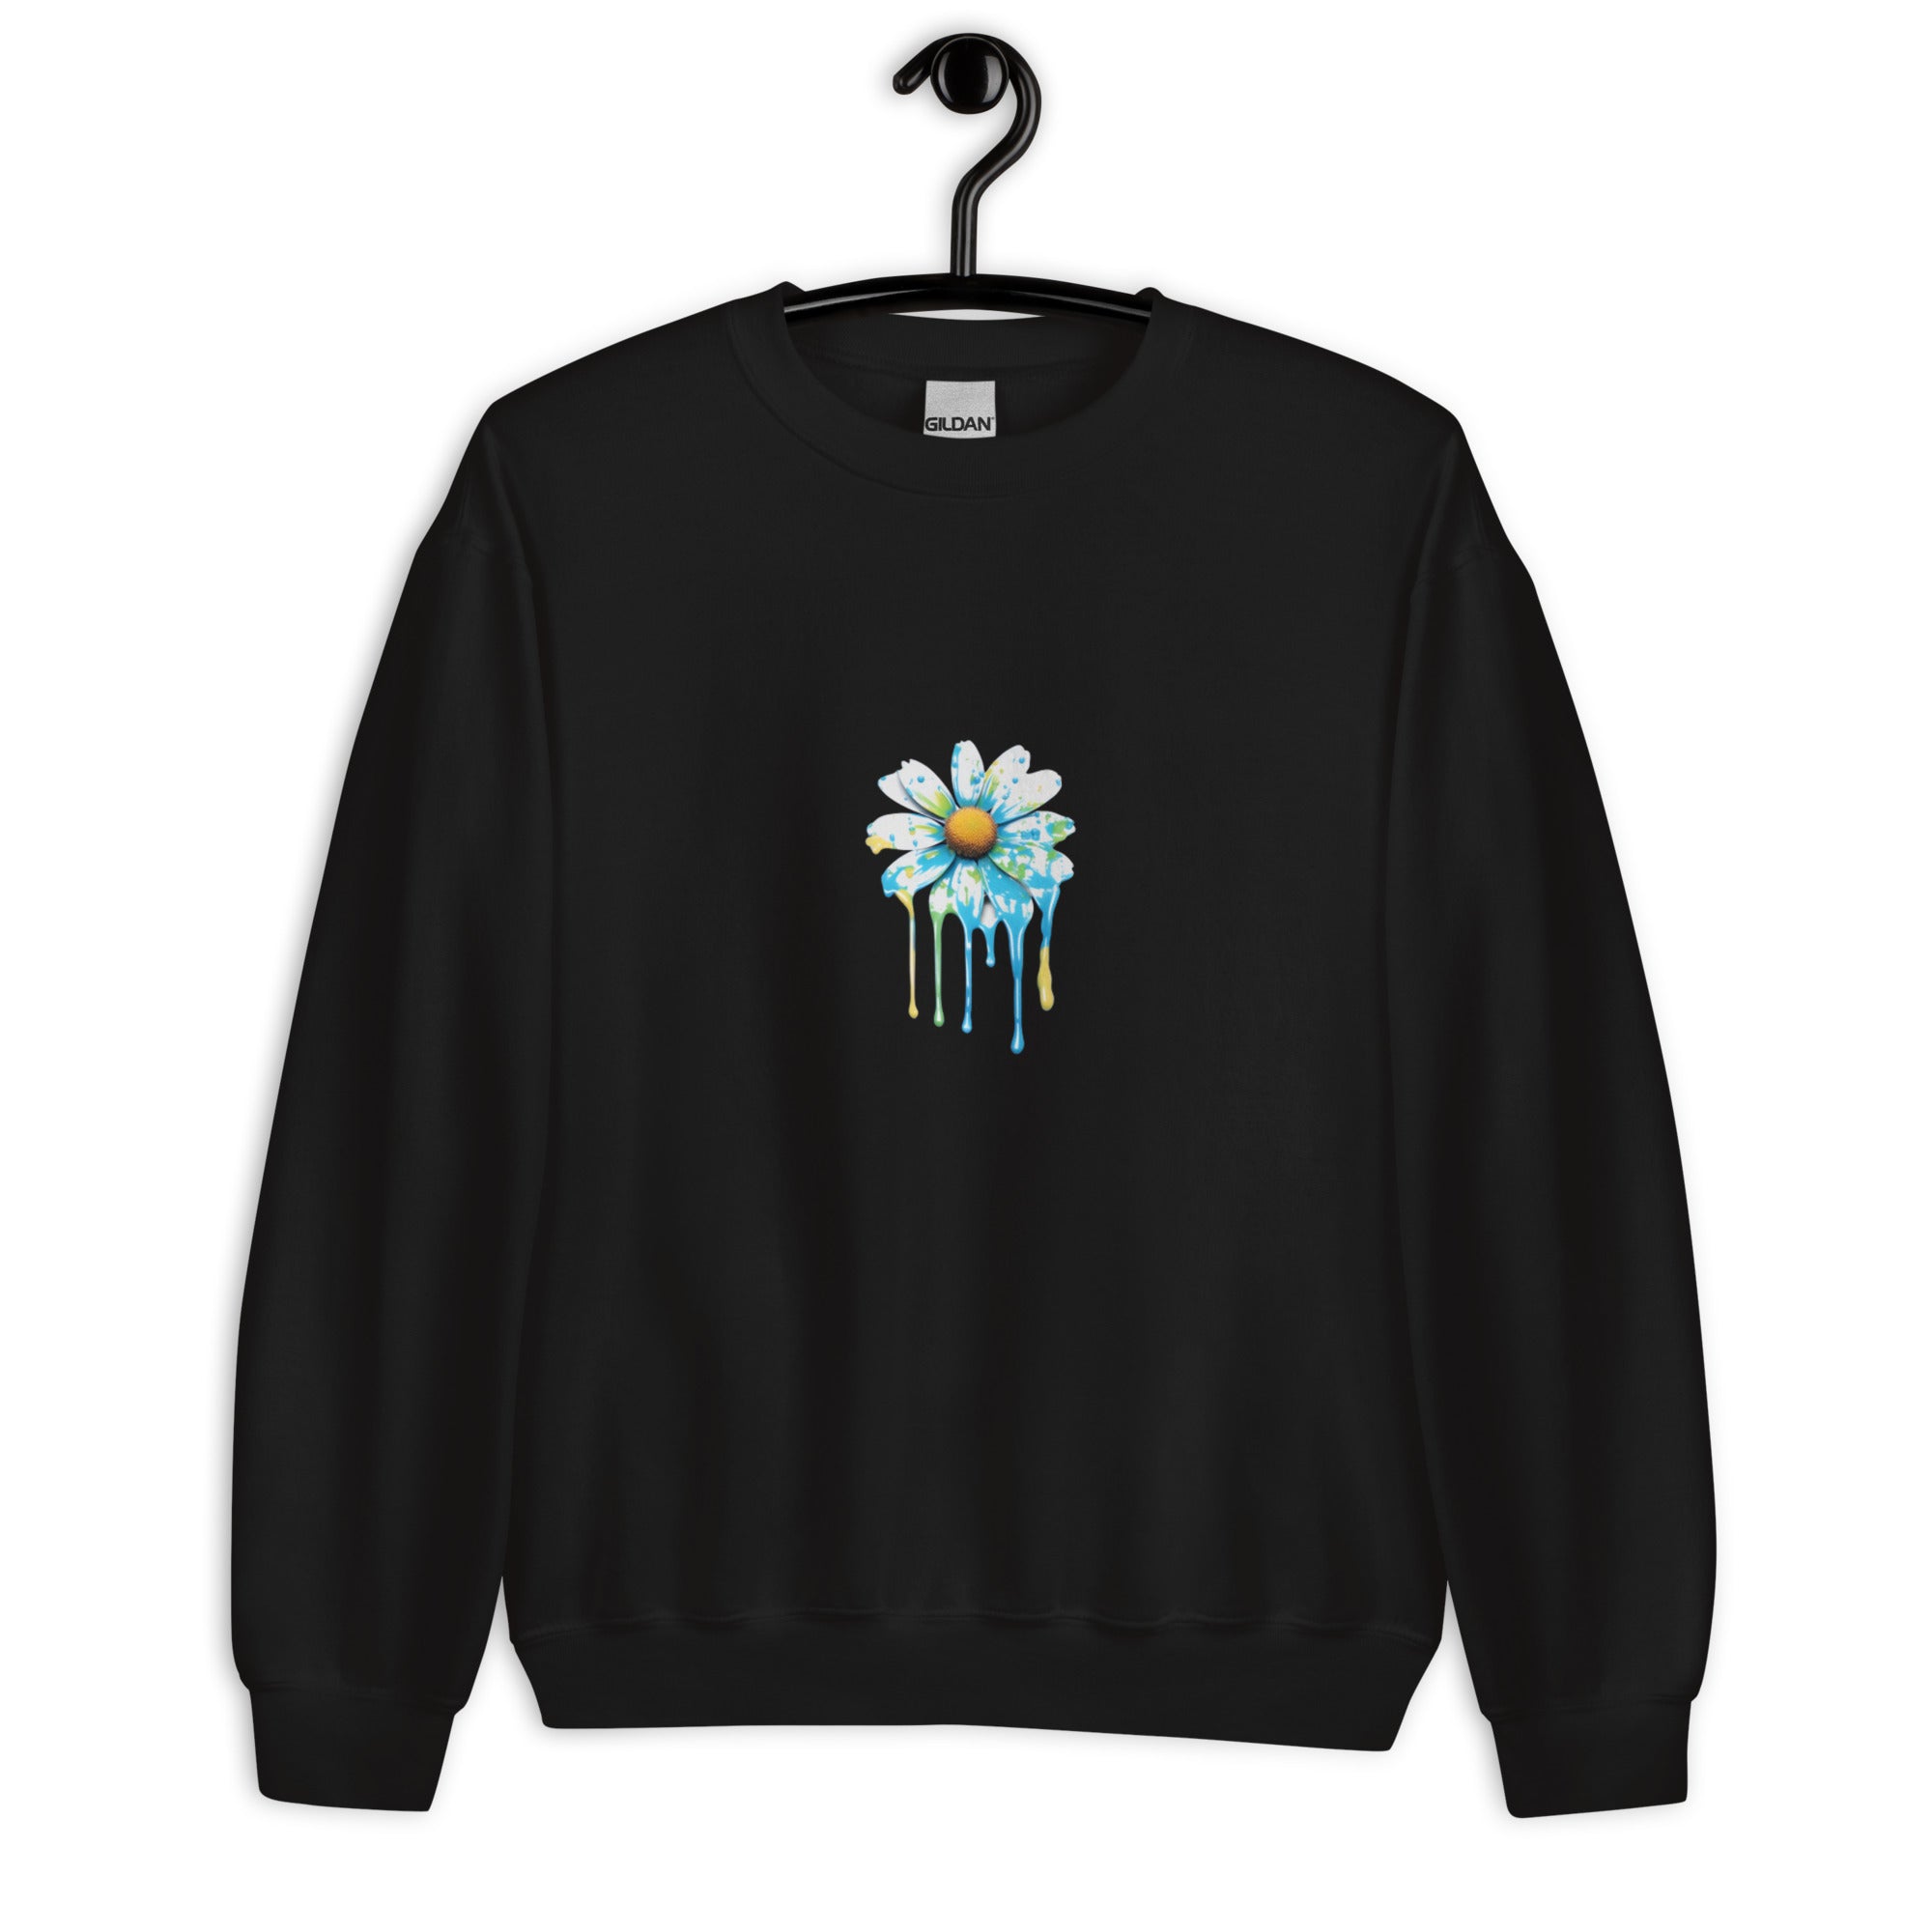 Black Crewneck sweatshirt with Daisy dripping blue green and yellow paint